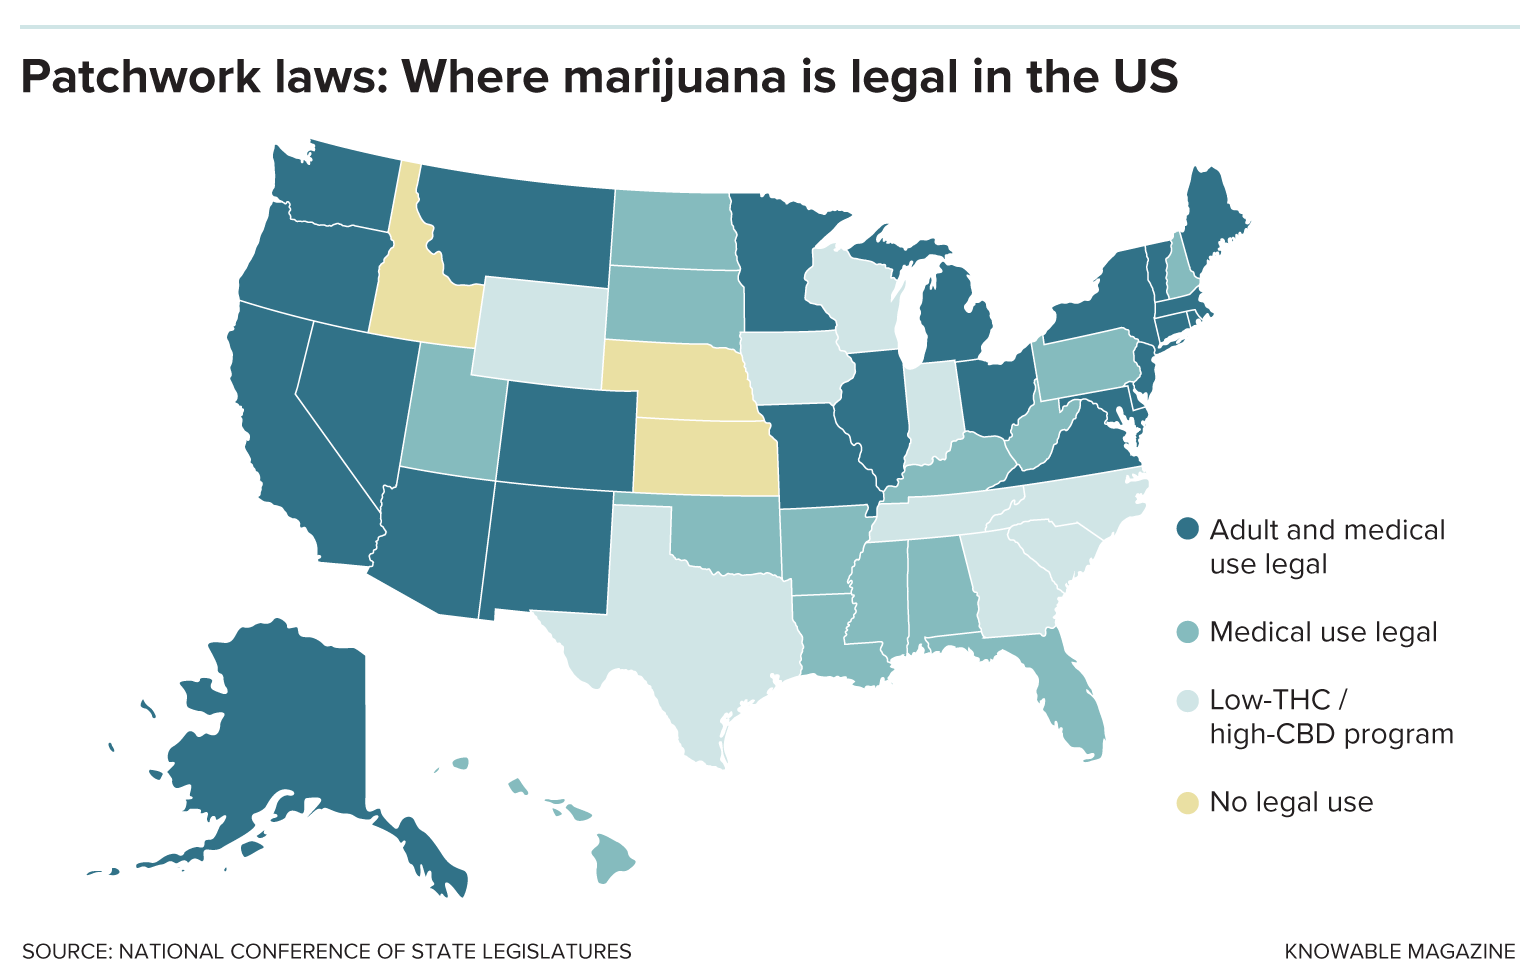 A graphic map of the US shows only three states where there is no legal use of marijuana. Many states allow legal adult recreational use; some allow medical use only and nine have a more restricted medical use policy with low-THC/high-CBD cannabis